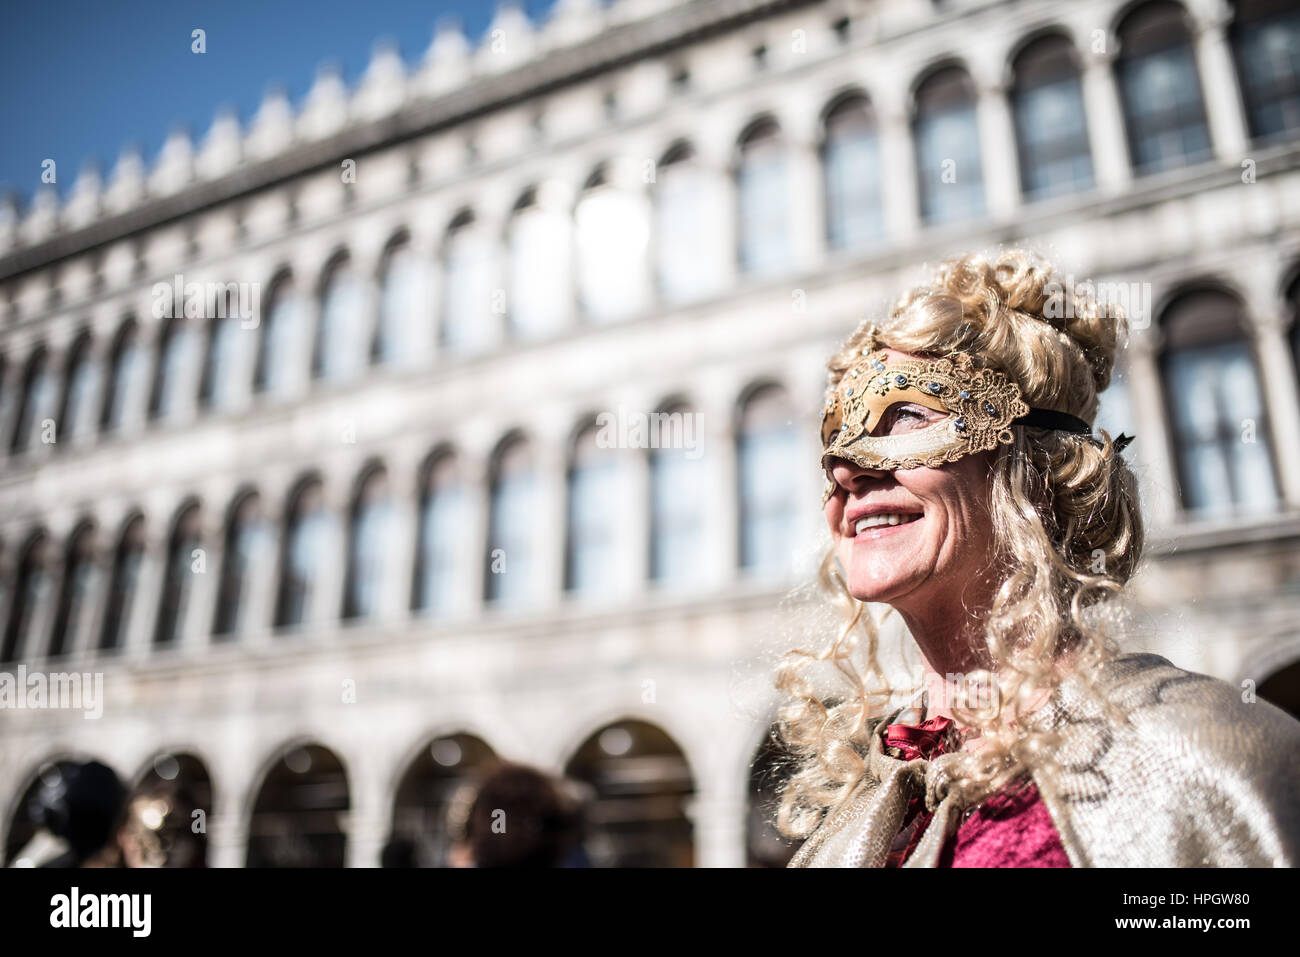 People with traditional mask at the Venice carnival 2017 Stock Photo